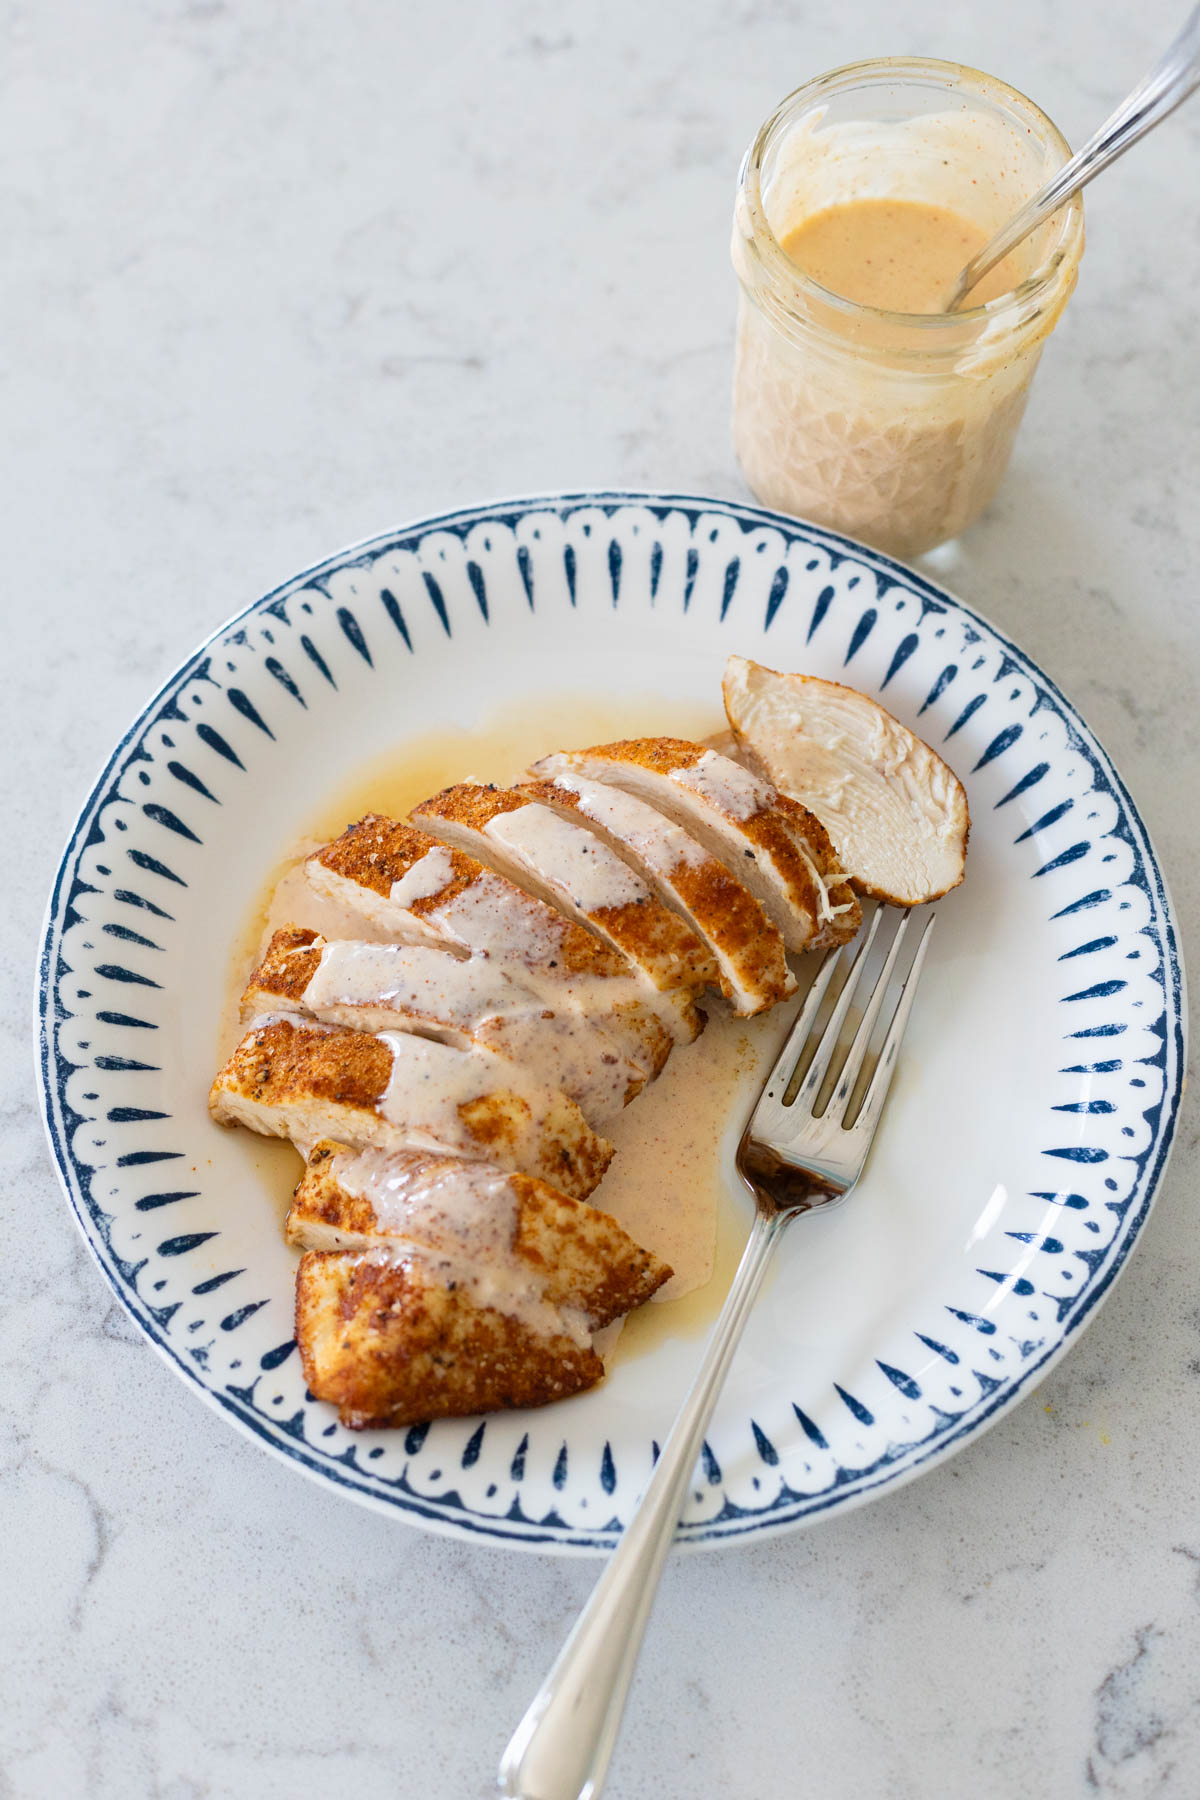 The baked chicken breast has been sliced and served on a plate with a drizzle of Alabama white sauce.